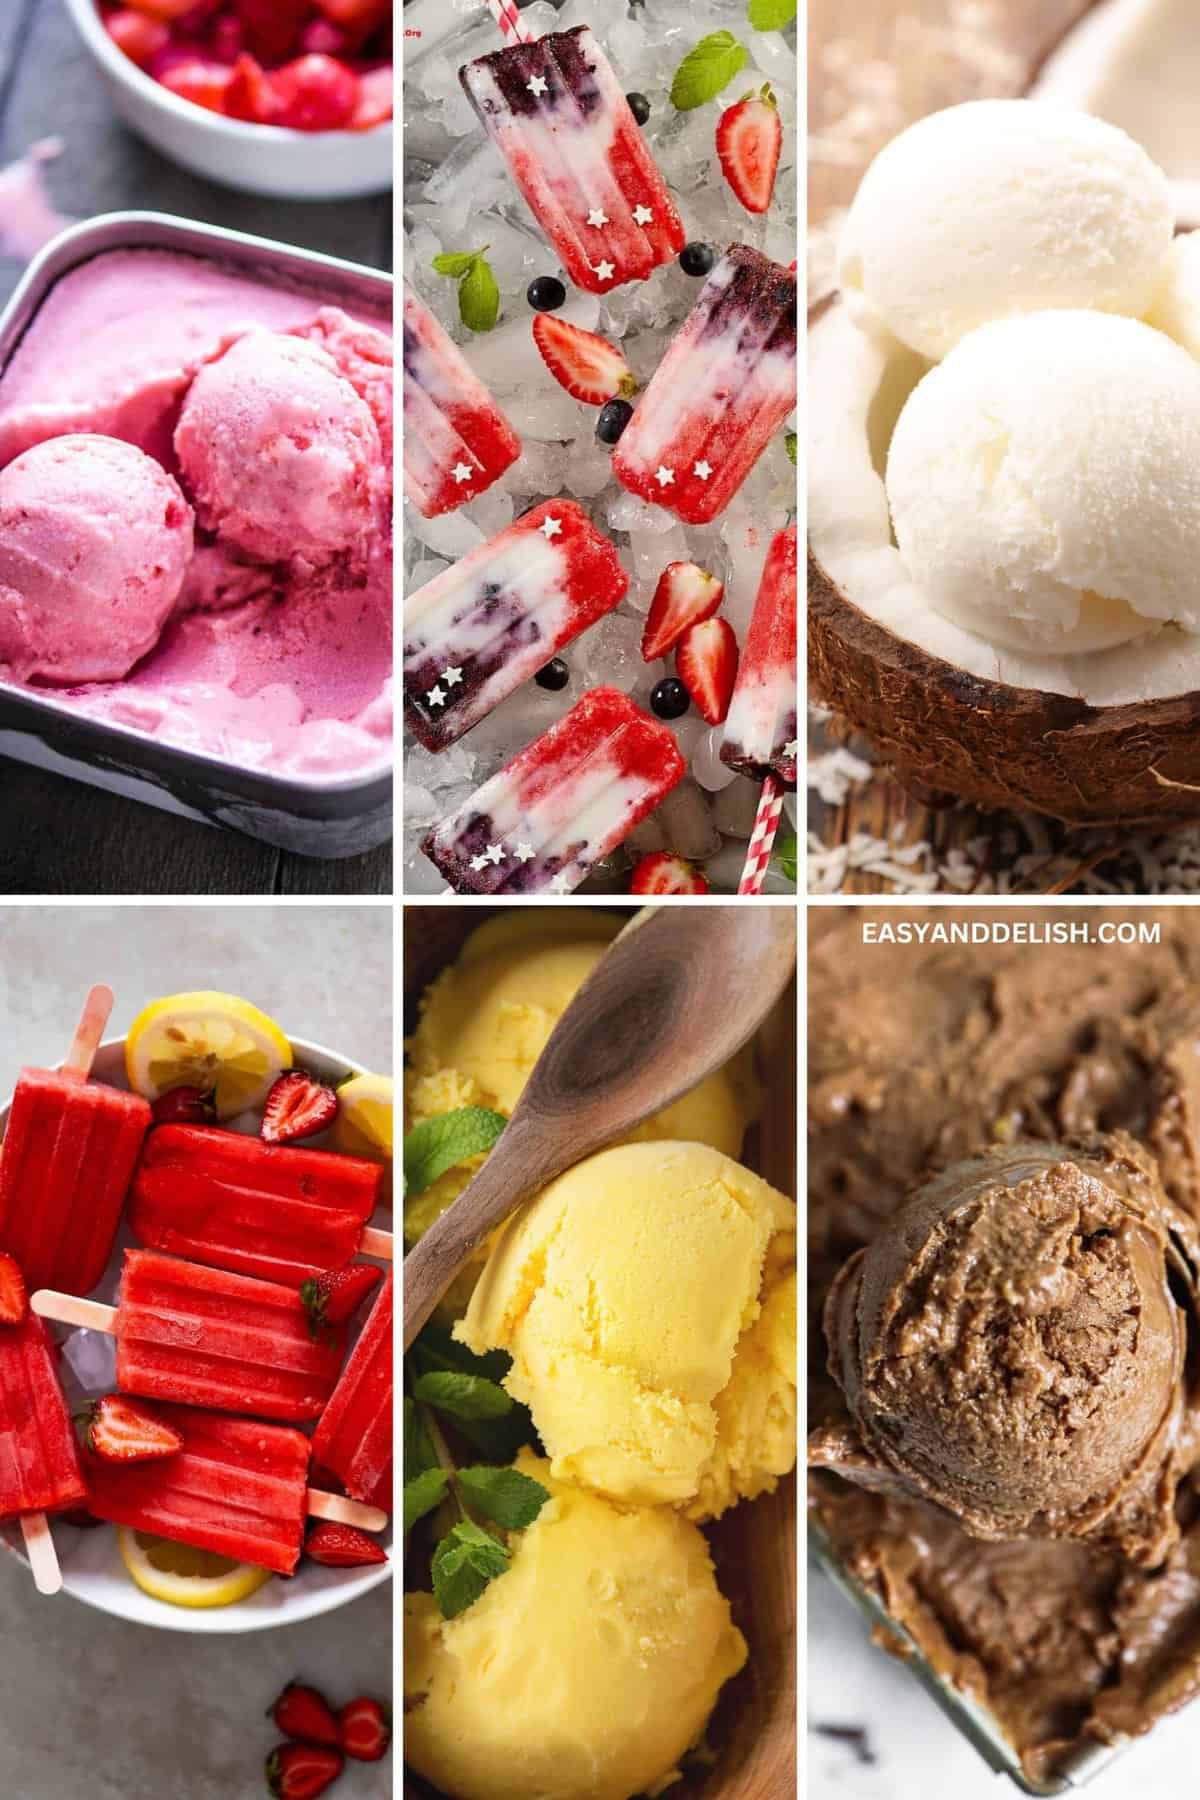 Image showing 6 out of 22 frozen treats such as ice creams and ice pops.